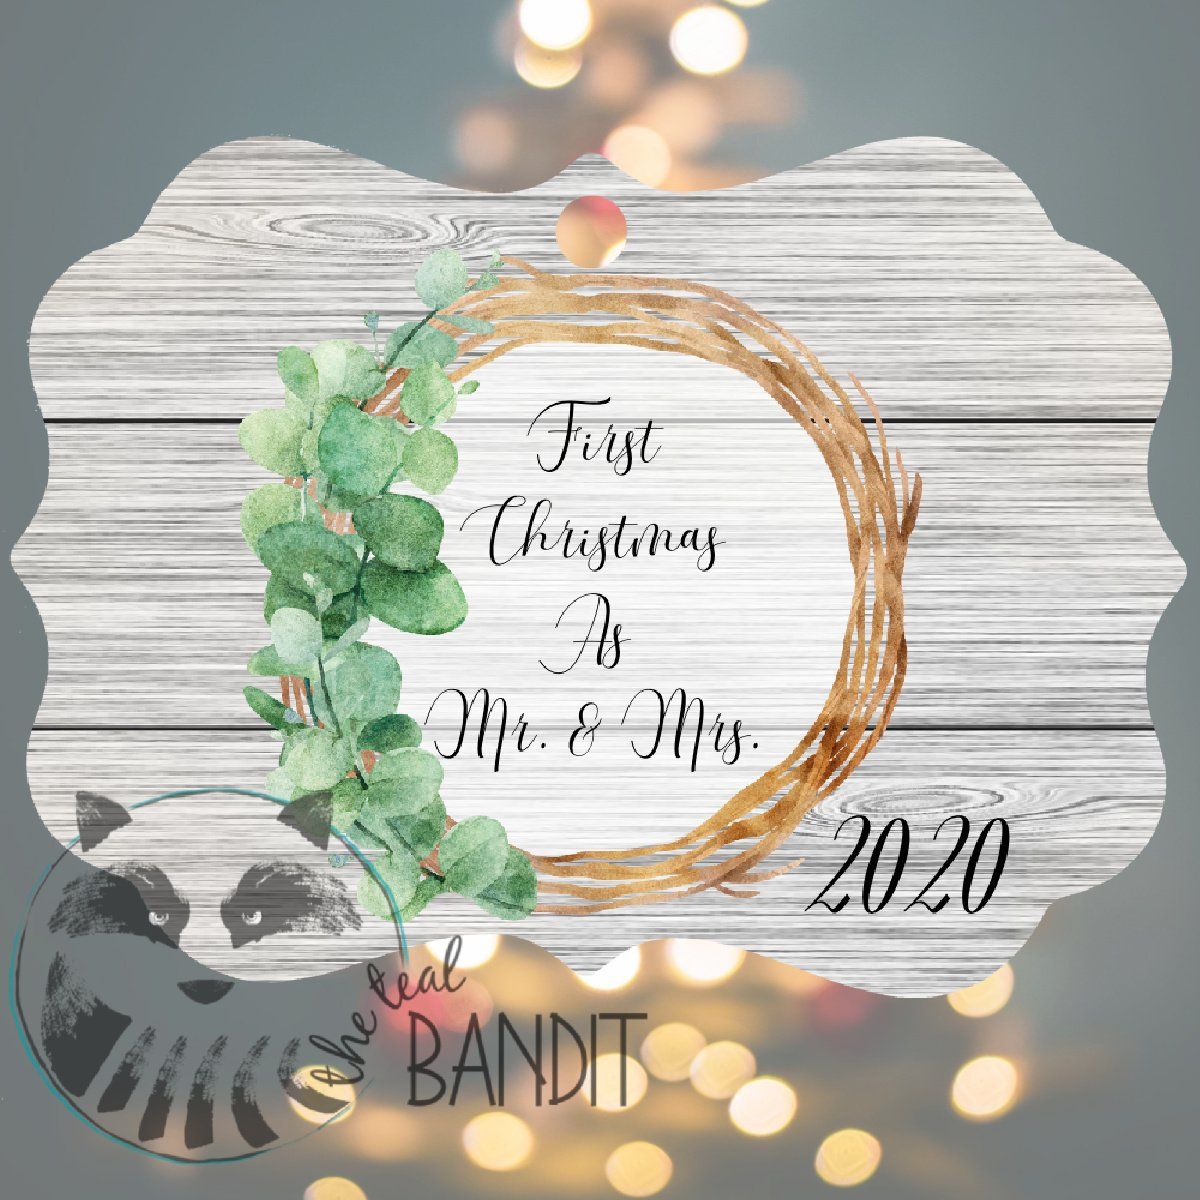 First Christmas Married Ornament The Teal Bandit Mr & Mrs 